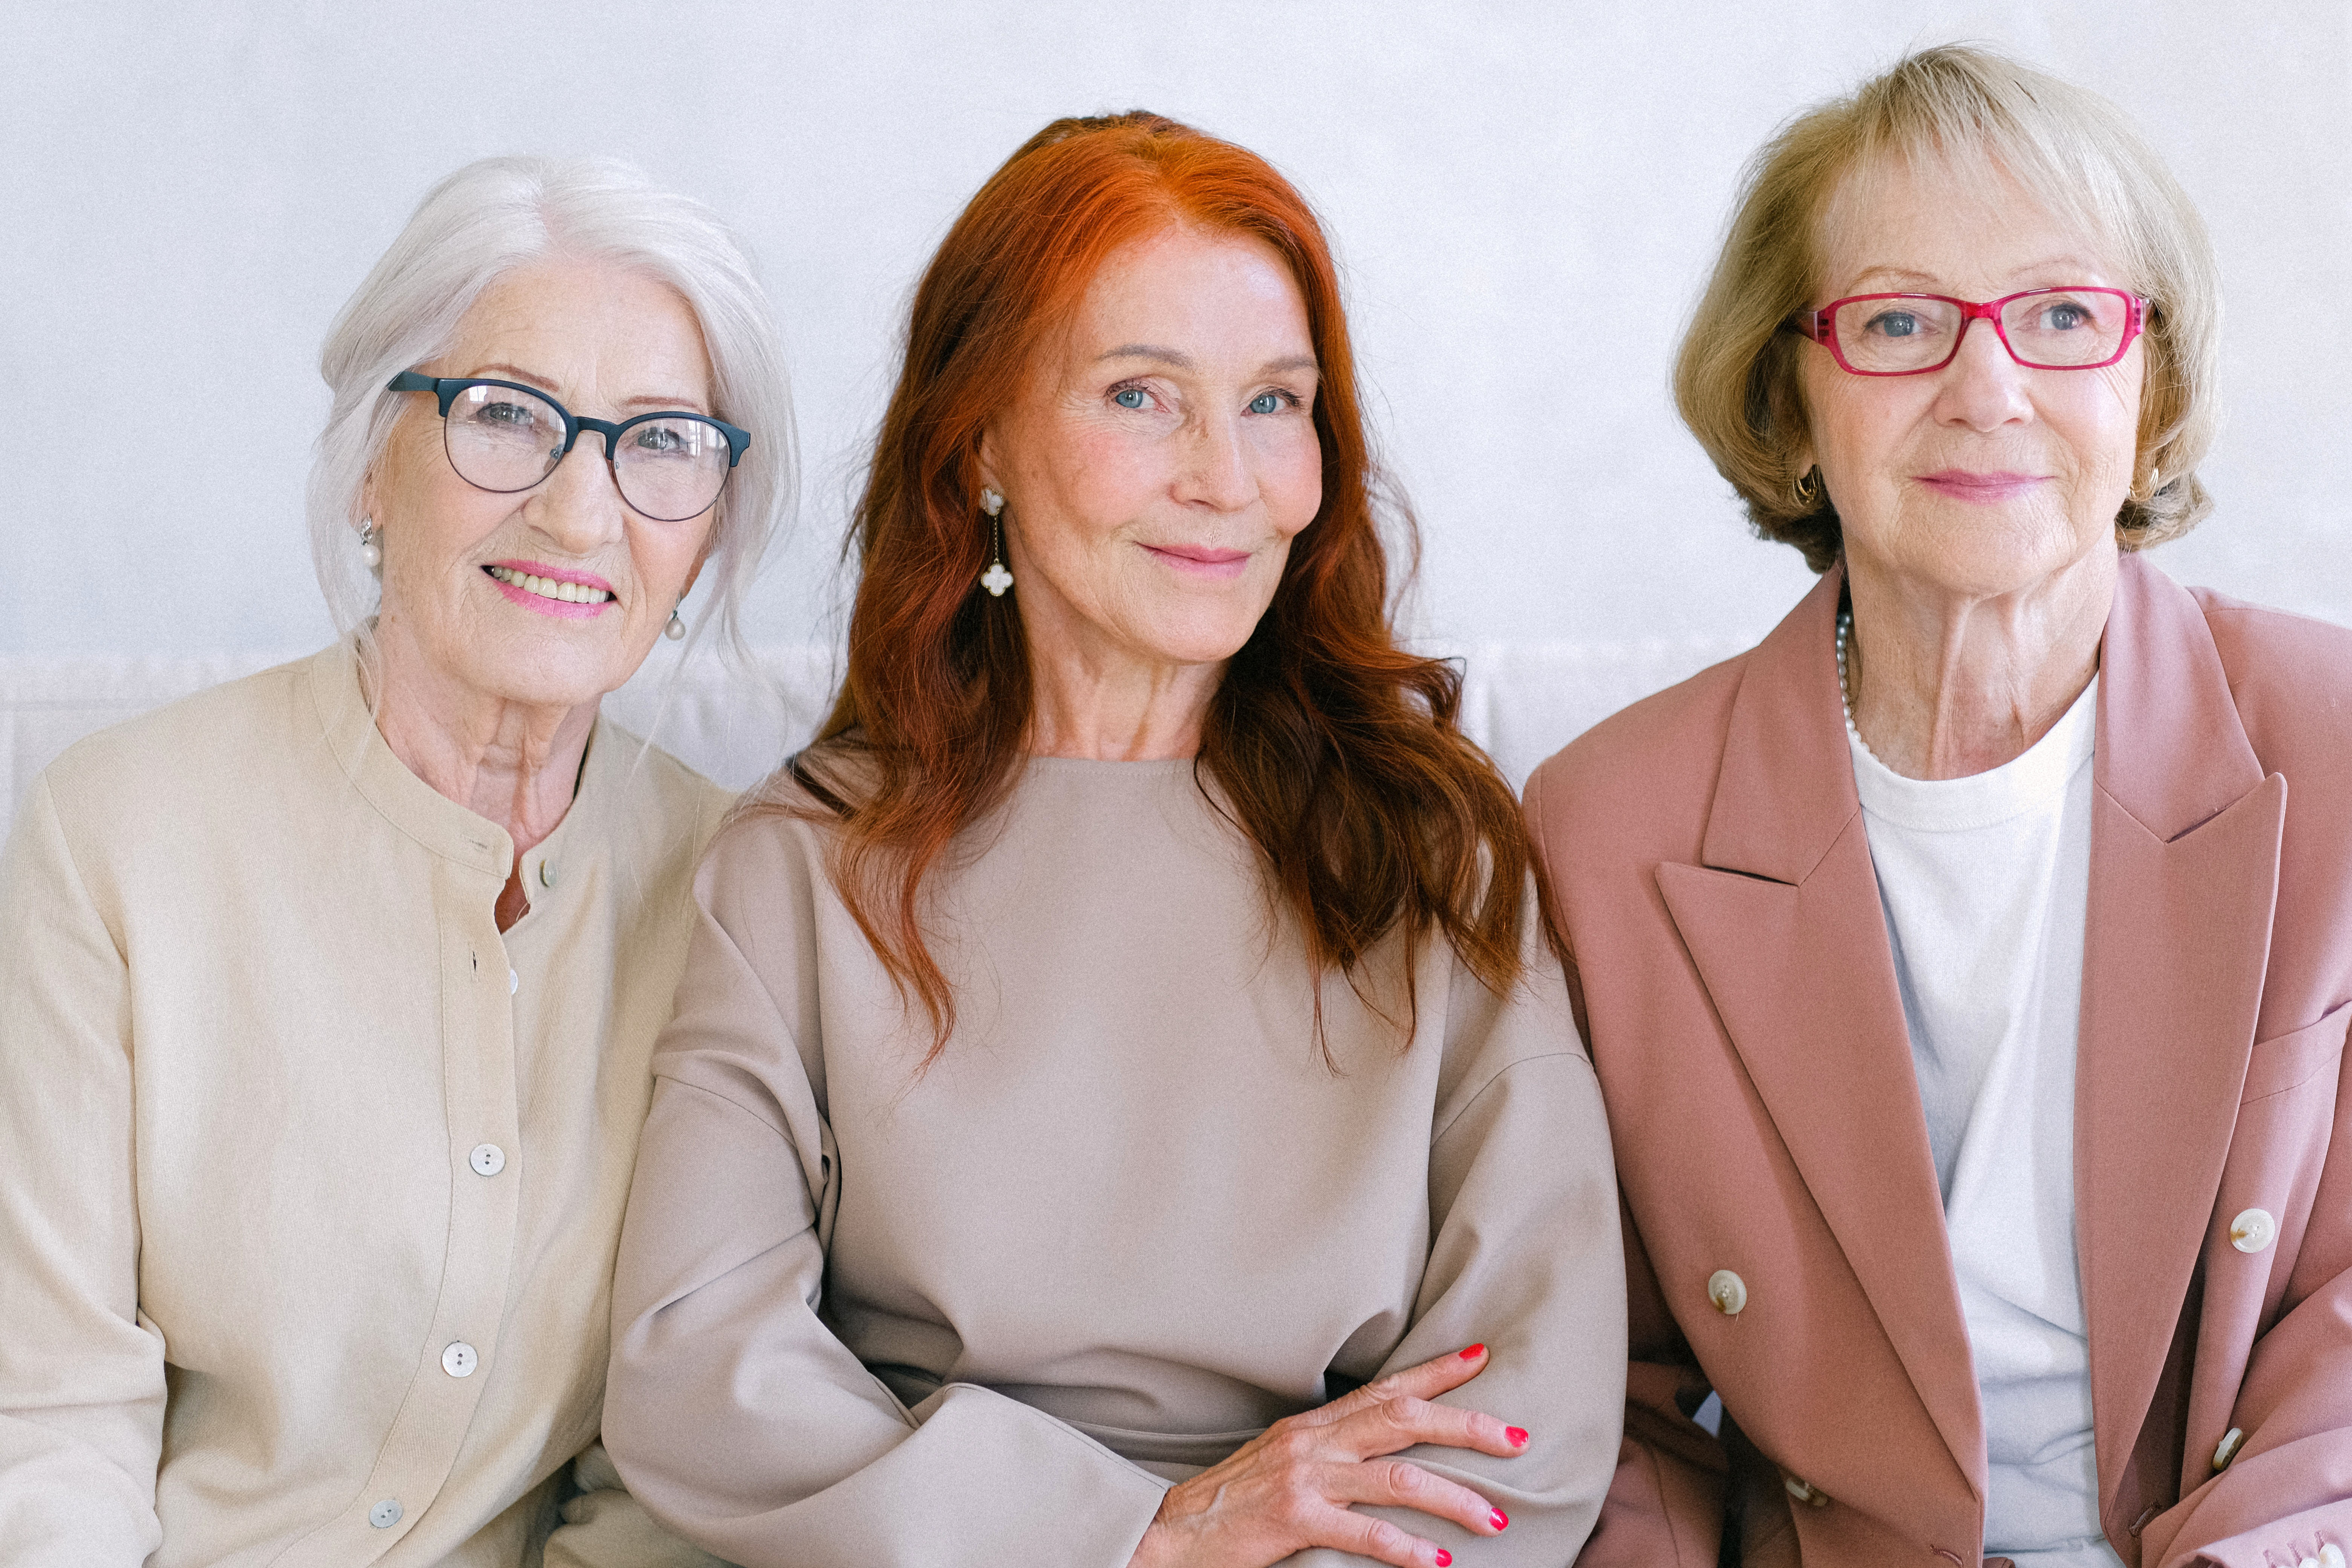 Three mid life women. Photo by  Anna Shvets for Pexels.